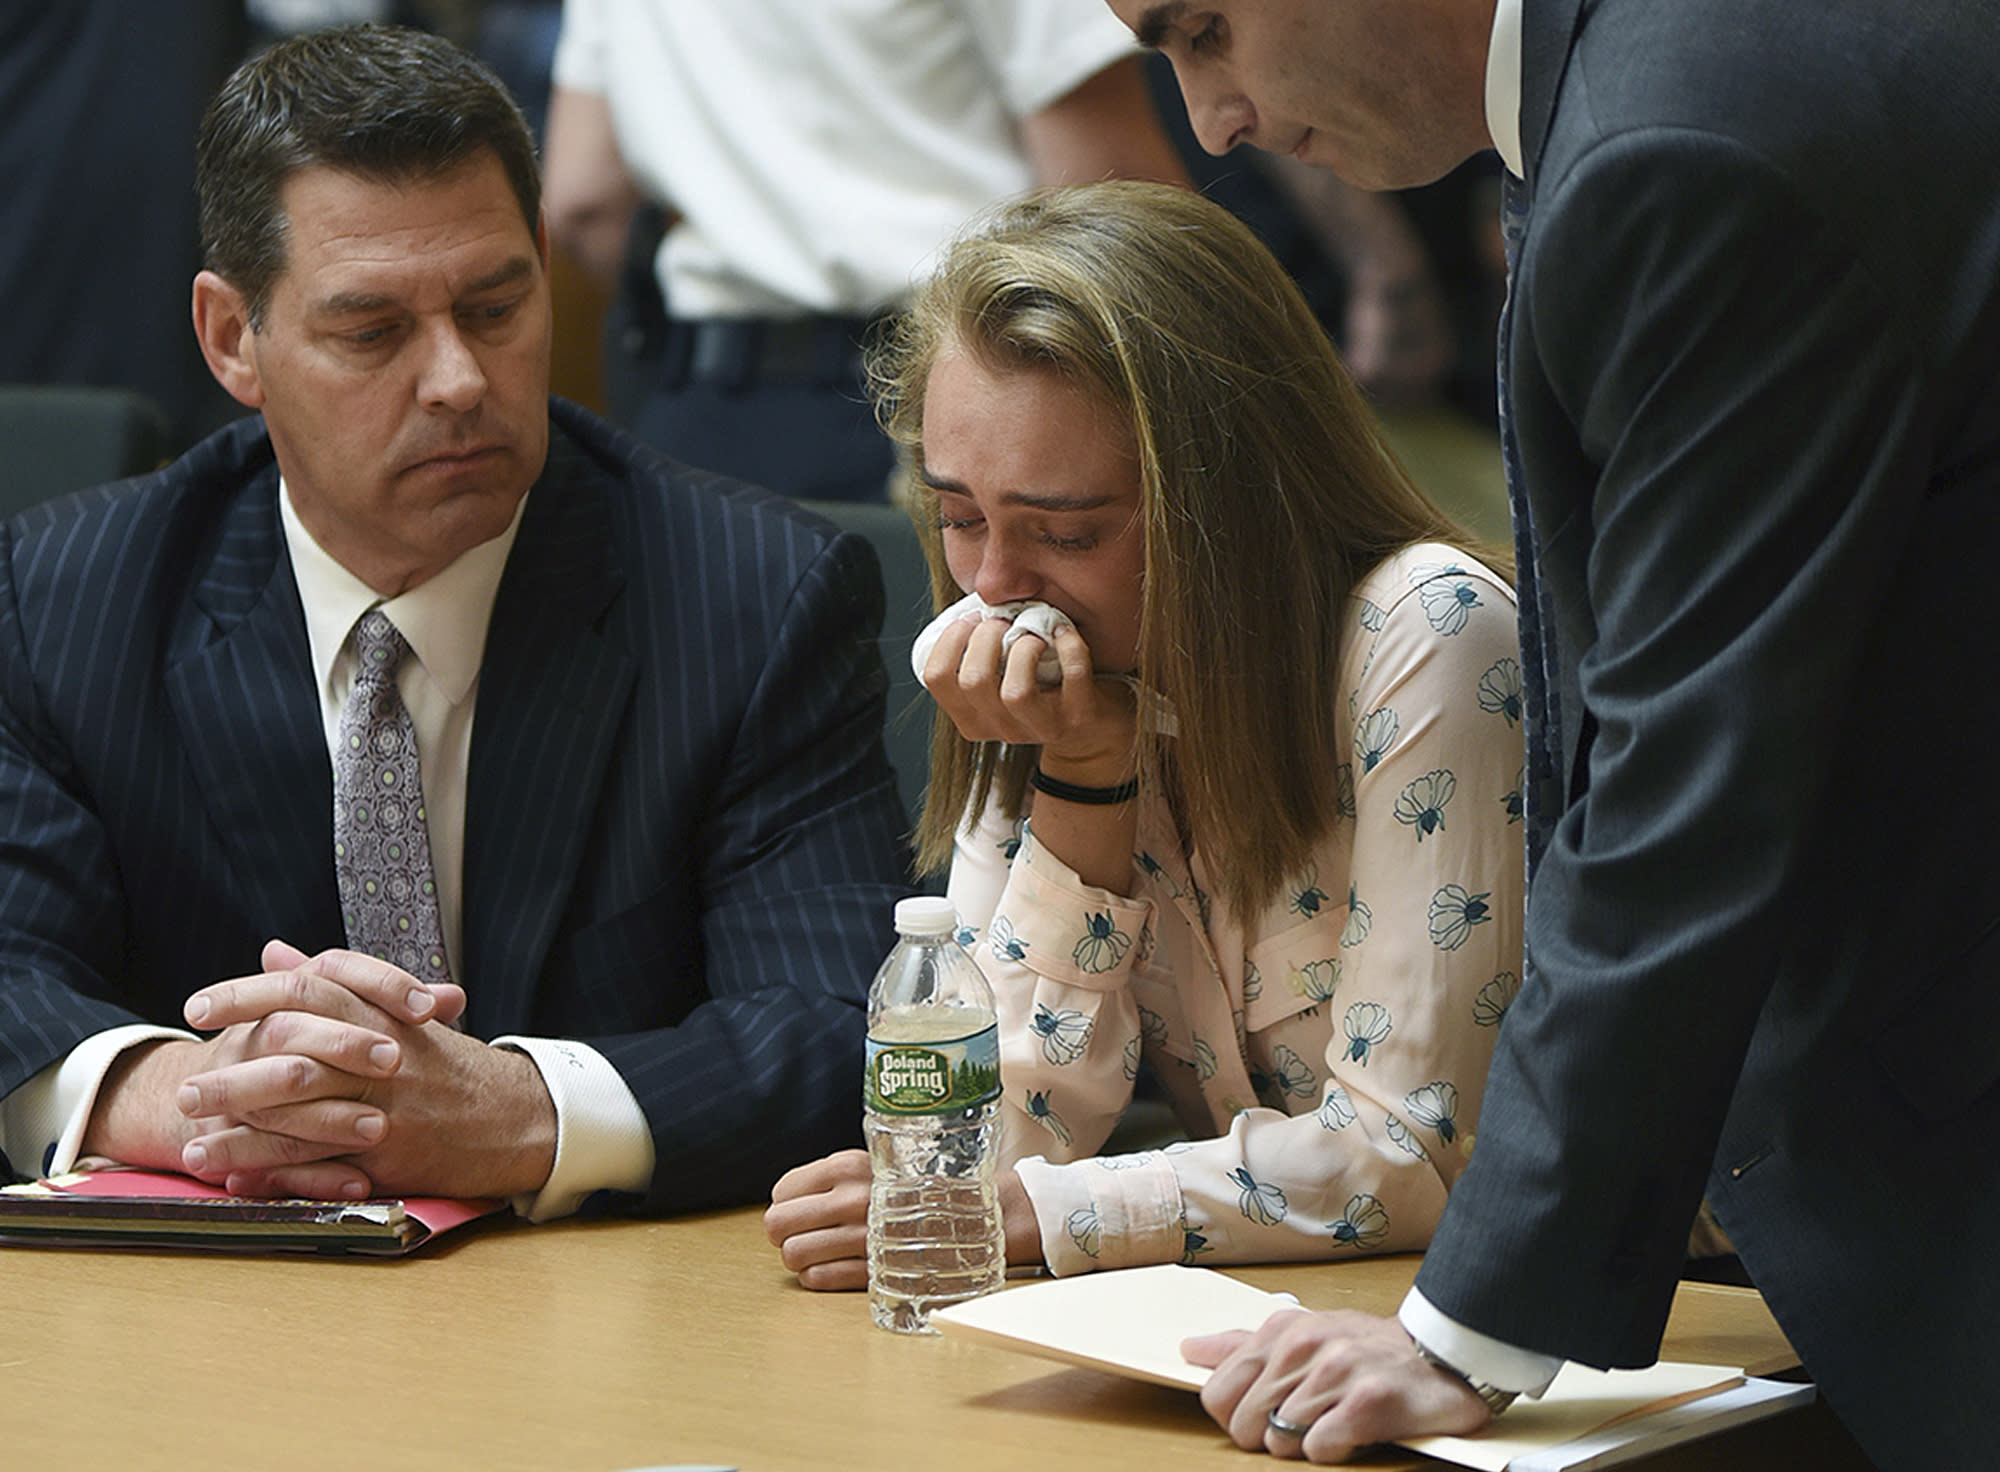 Girlfriend whose texts urged suicide guilty of manslaughter